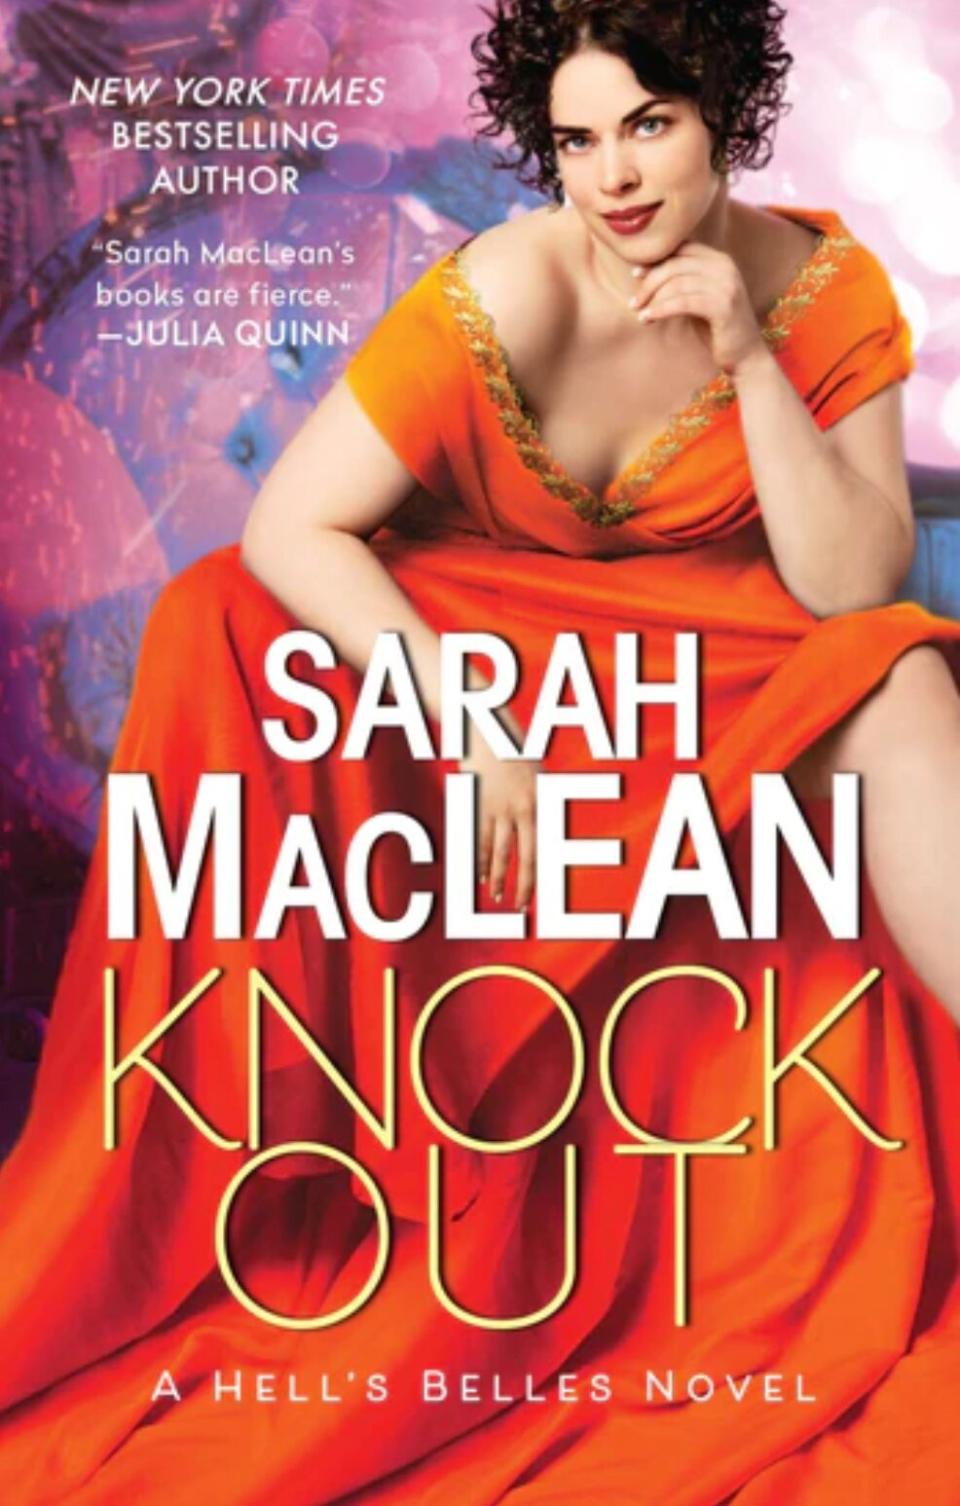 Knock Out by Sarah MacLean